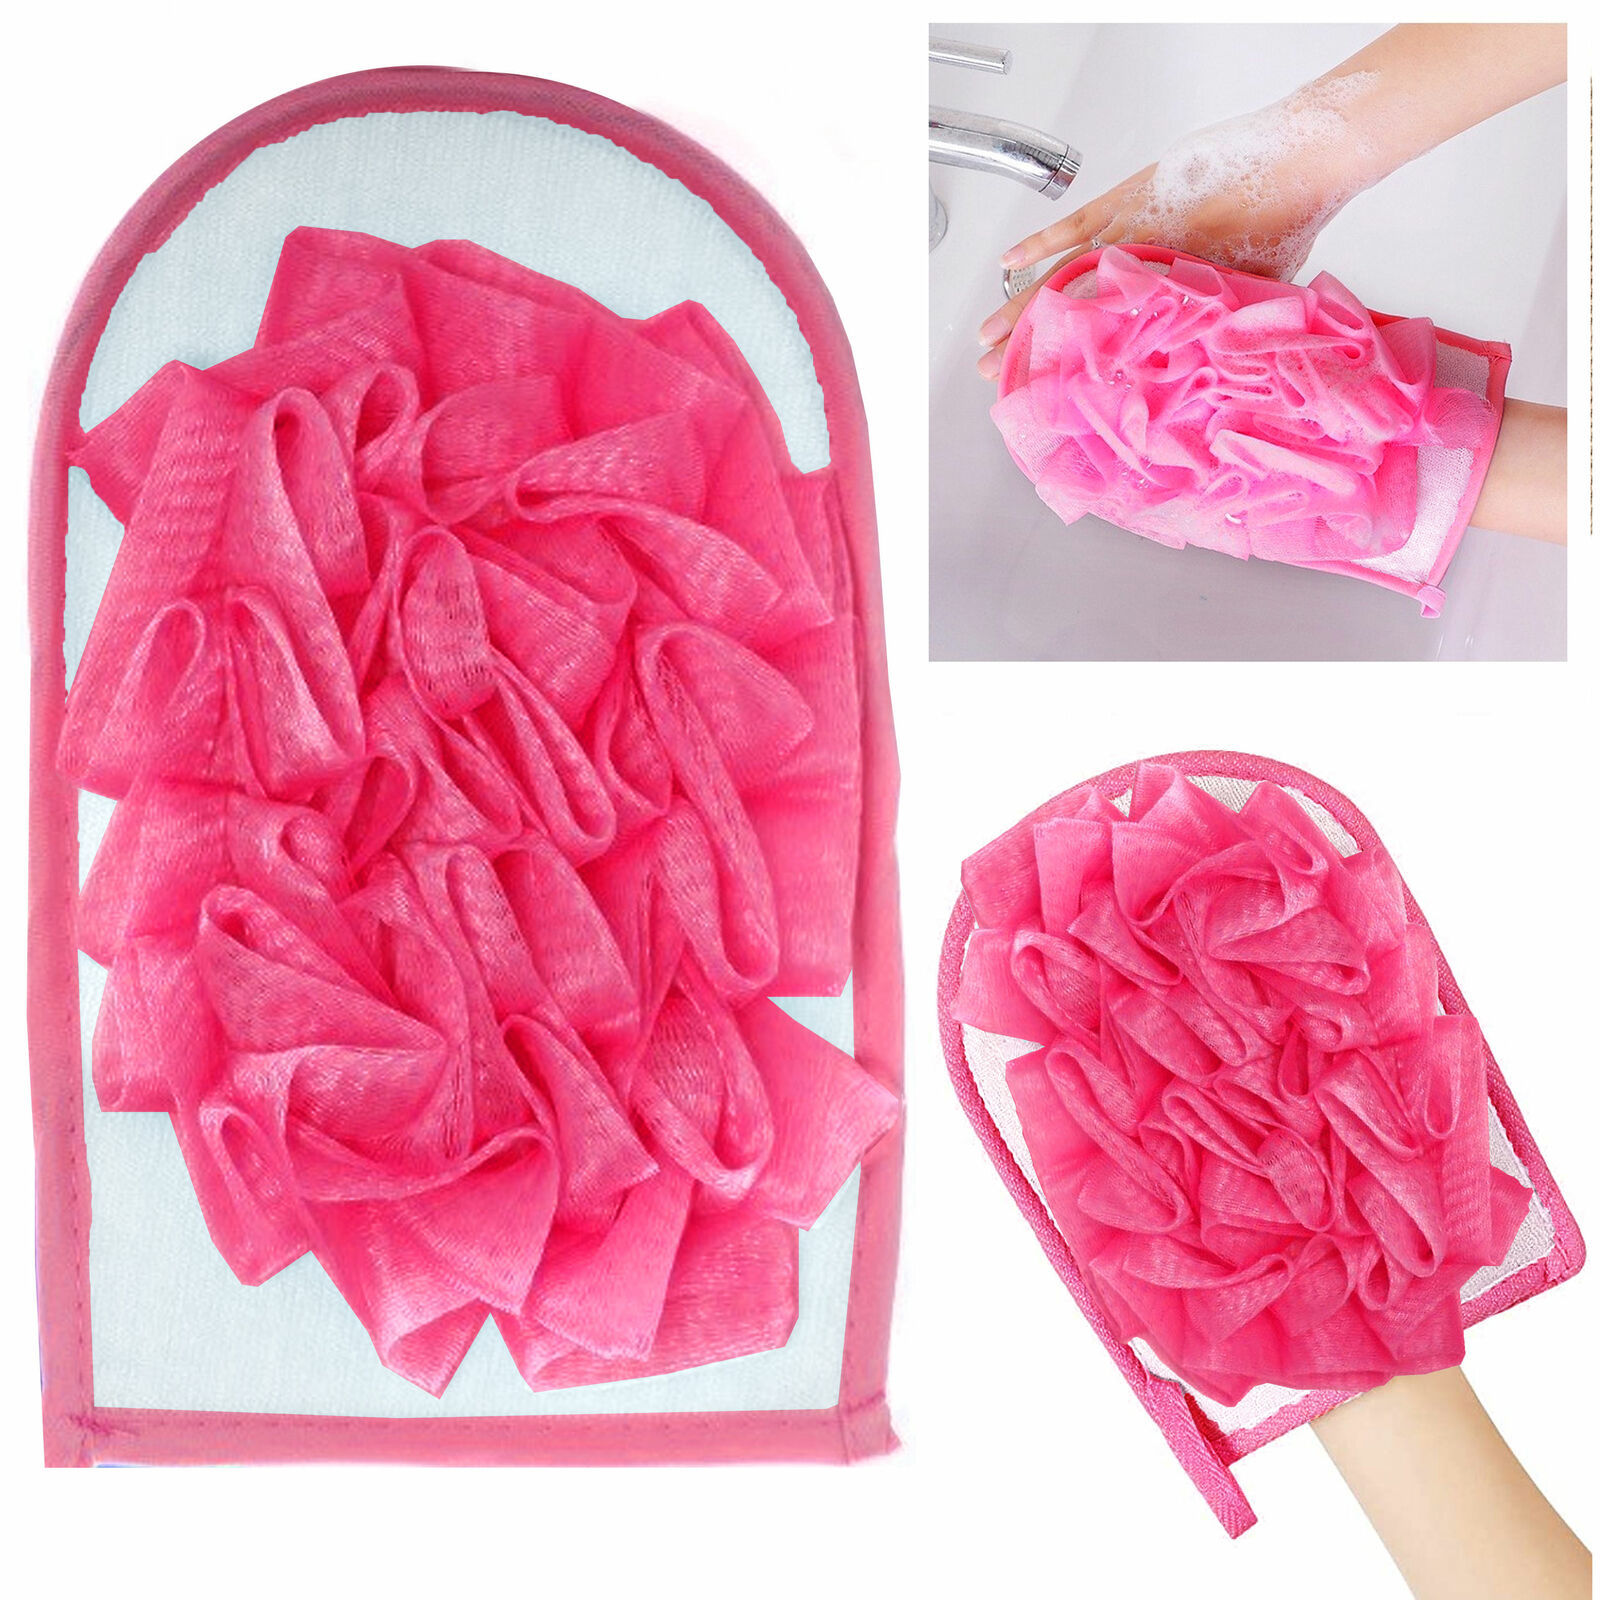 Primary image for 2 Pc Exfoliating Spa Bath Gloves Sponge Mitts Shower Soap Loofah Body Scrubber